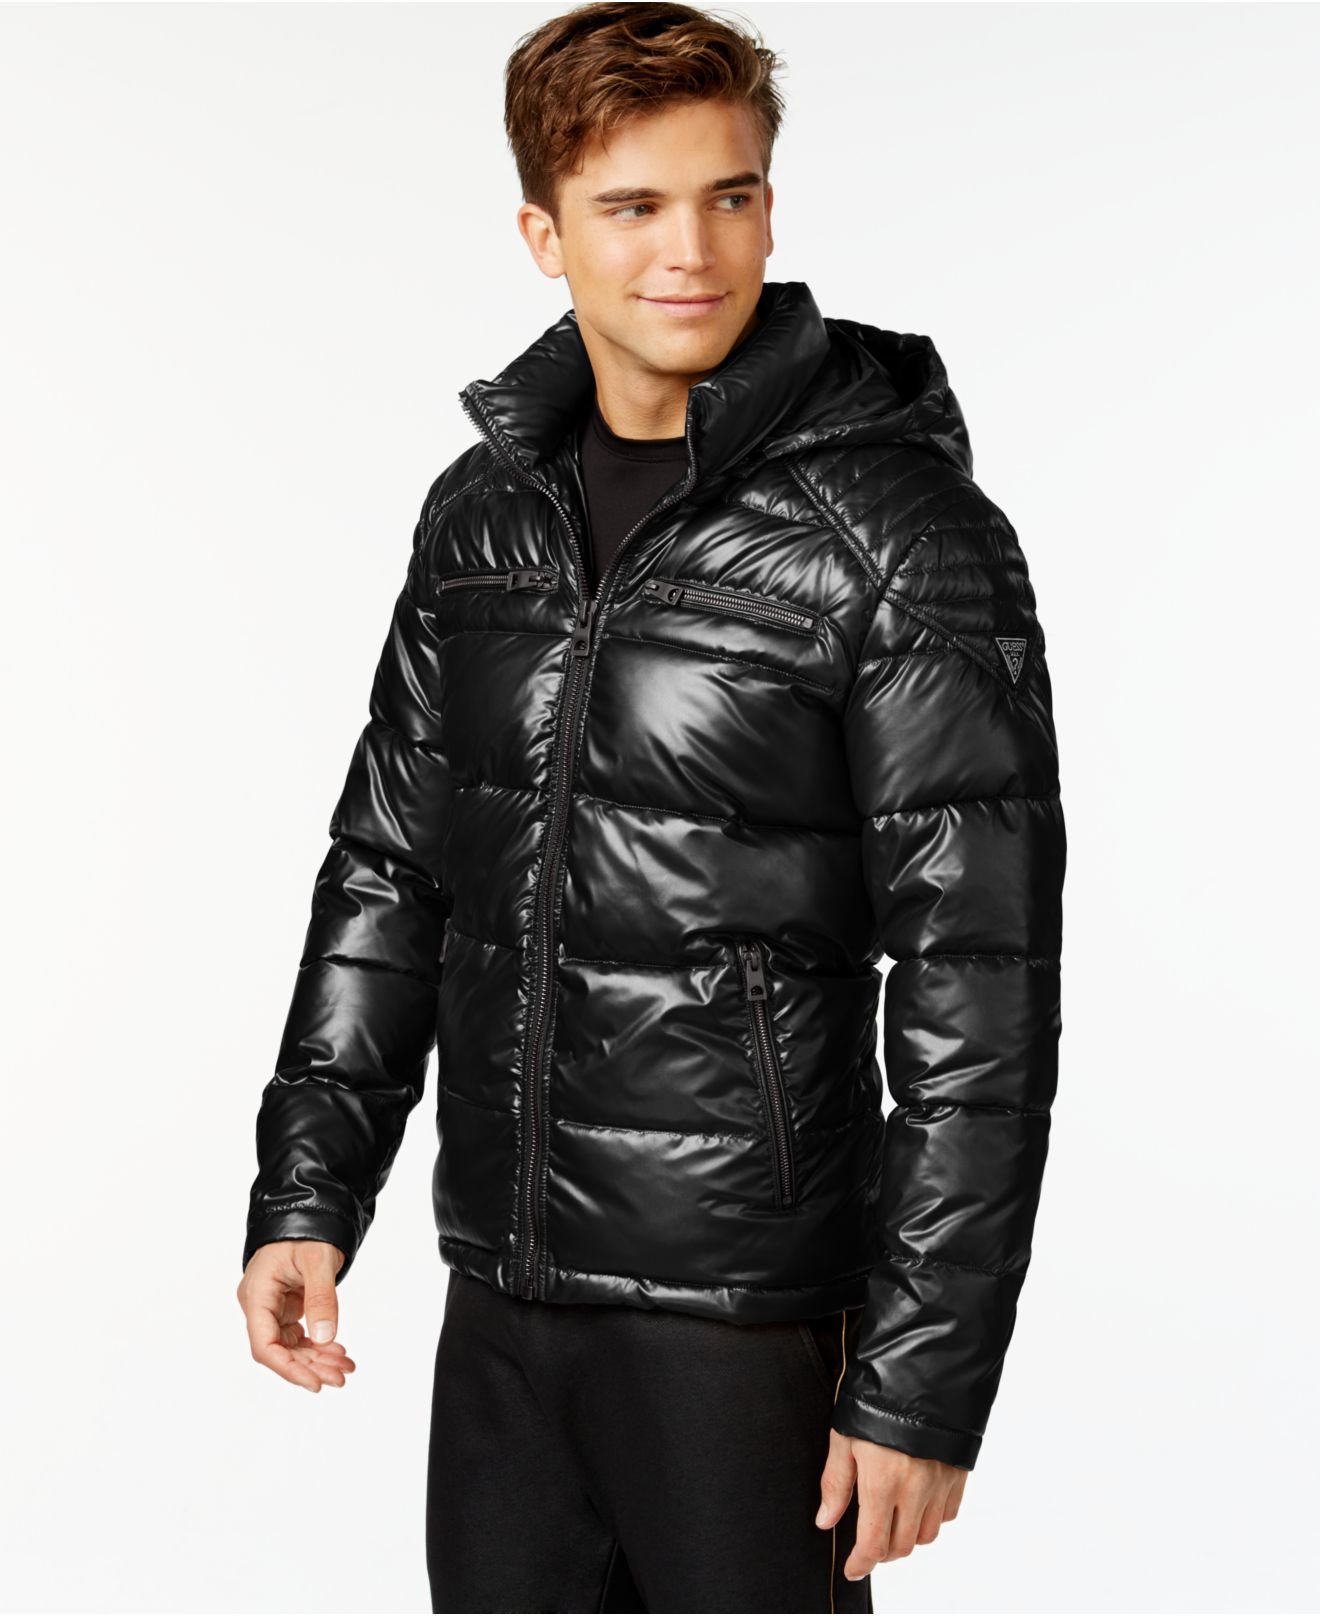 Guess Hooded Puffer Jacket in Black for Men - Lyst